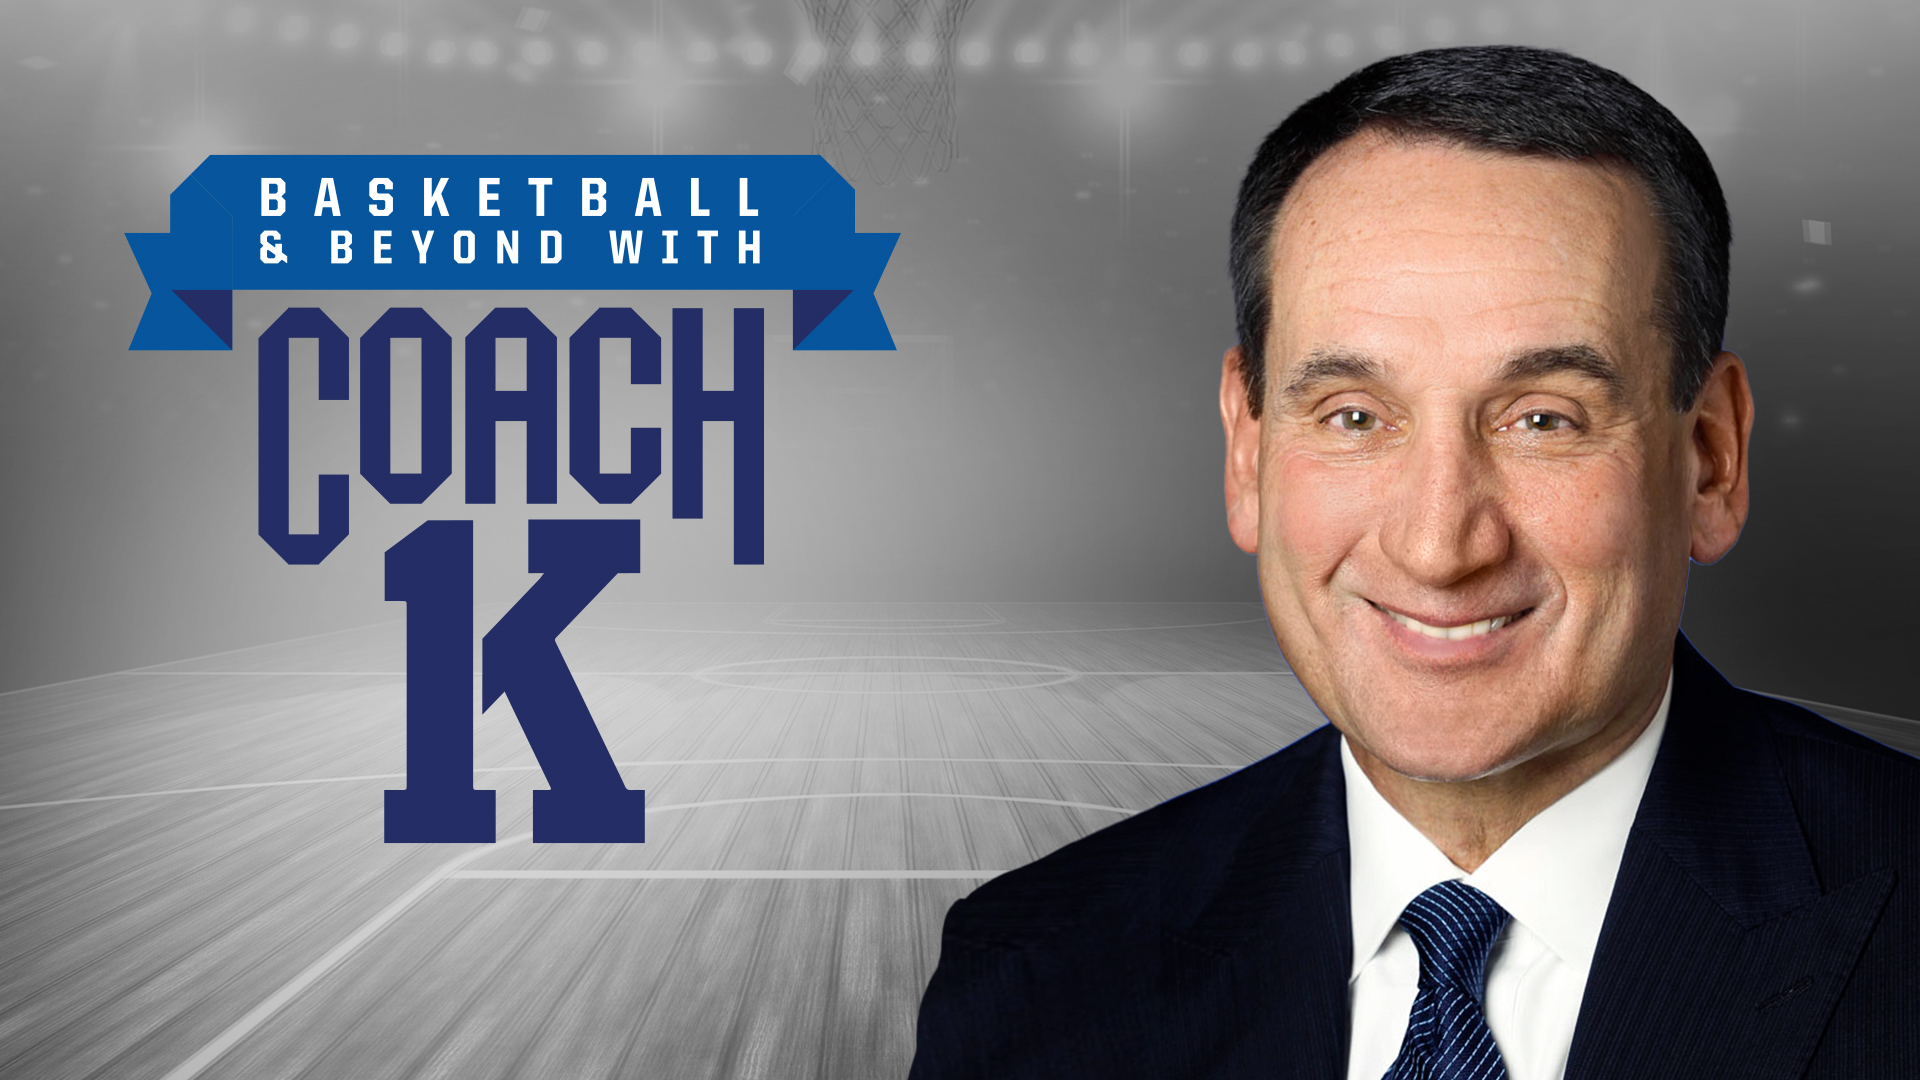 SiriusXM Basketball and Beyond with Coach K